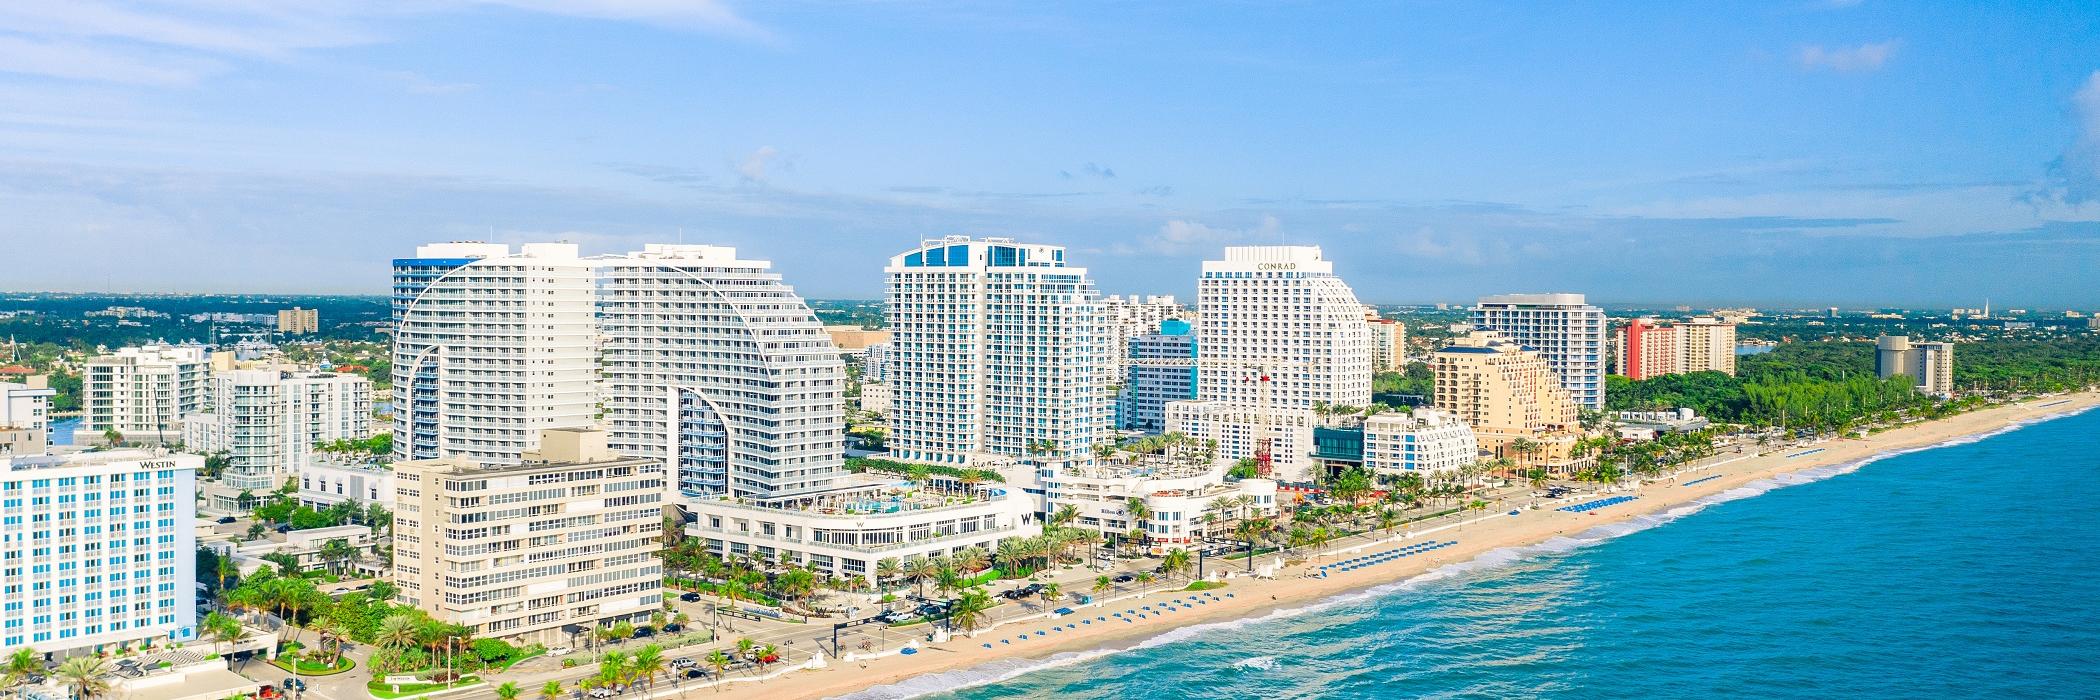 Aerial view of hotels along Fort Lauderdale beach taken from above the ocean to the east